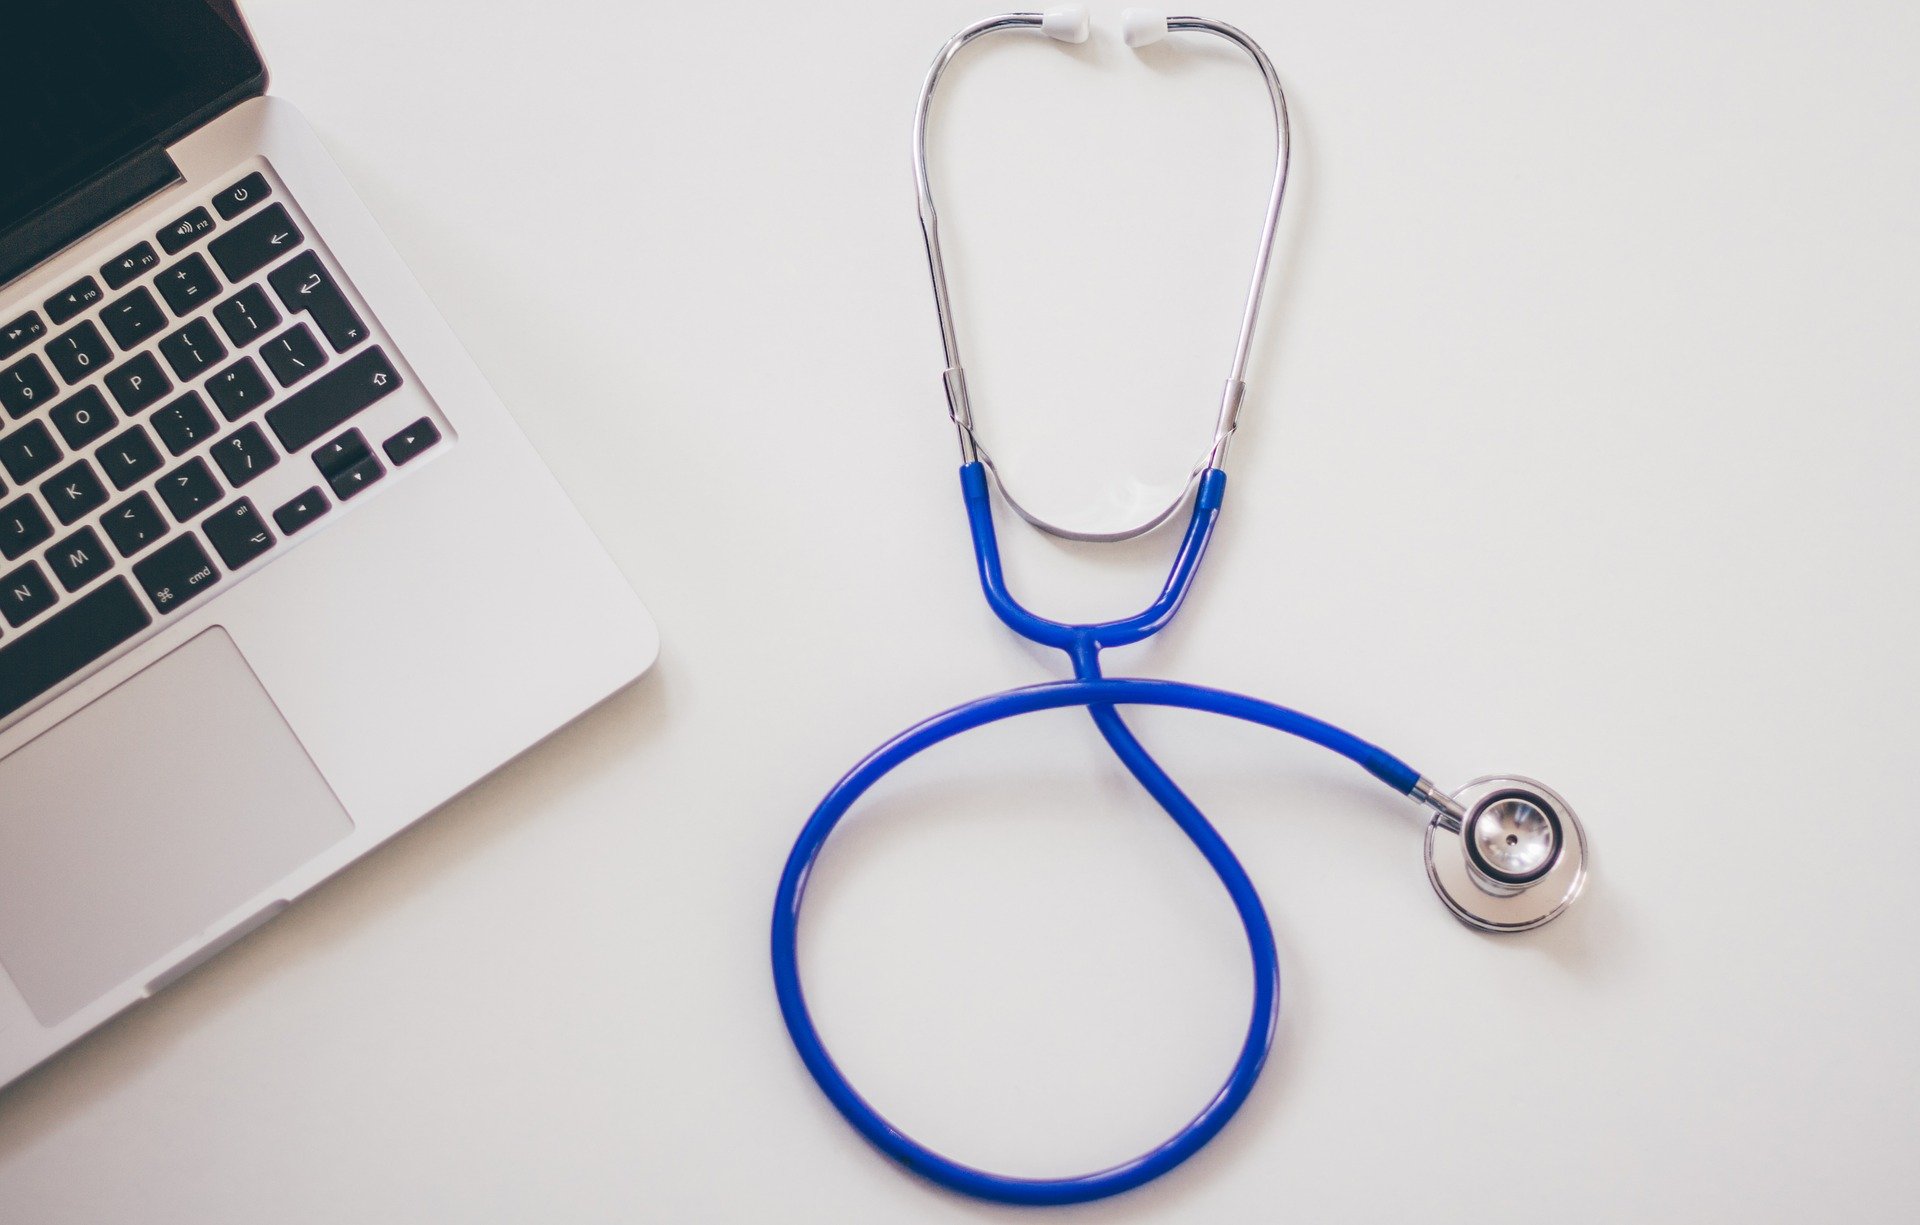 Computer and stethoscope on white desktop; representing a Health Savings Account (HSA)